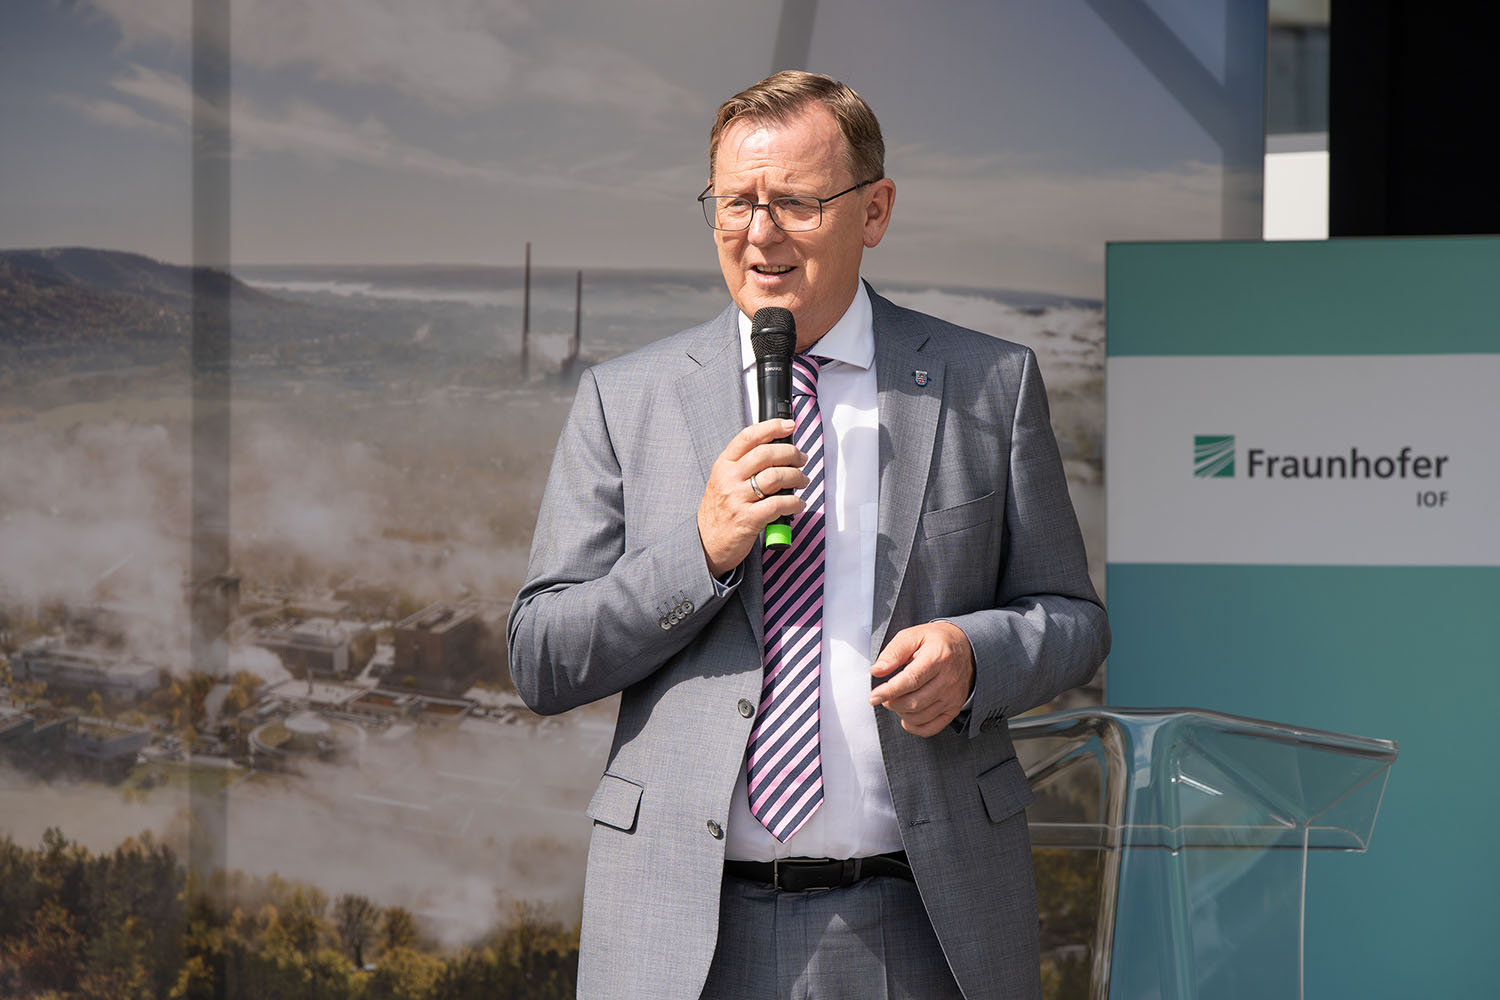 Bodo Ramelow speaks at the laying of the foundation stone for the new Fraunhofer IOF research building.